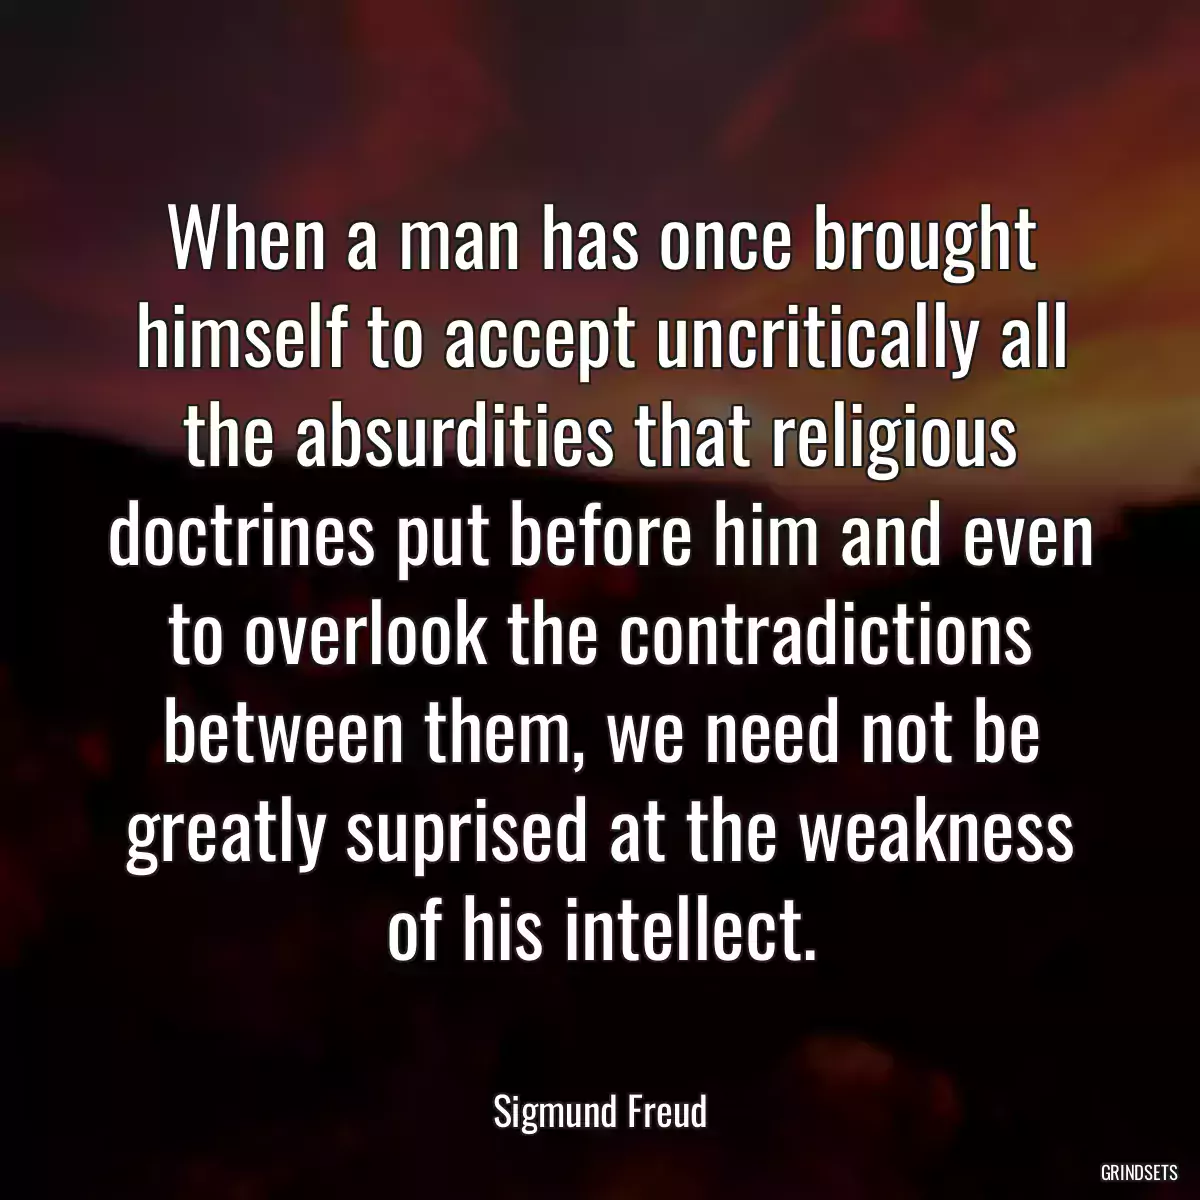 When a man has once brought himself to accept uncritically all the absurdities that religious doctrines put before him and even to overlook the contradictions between them, we need not be greatly suprised at the weakness of his intellect.